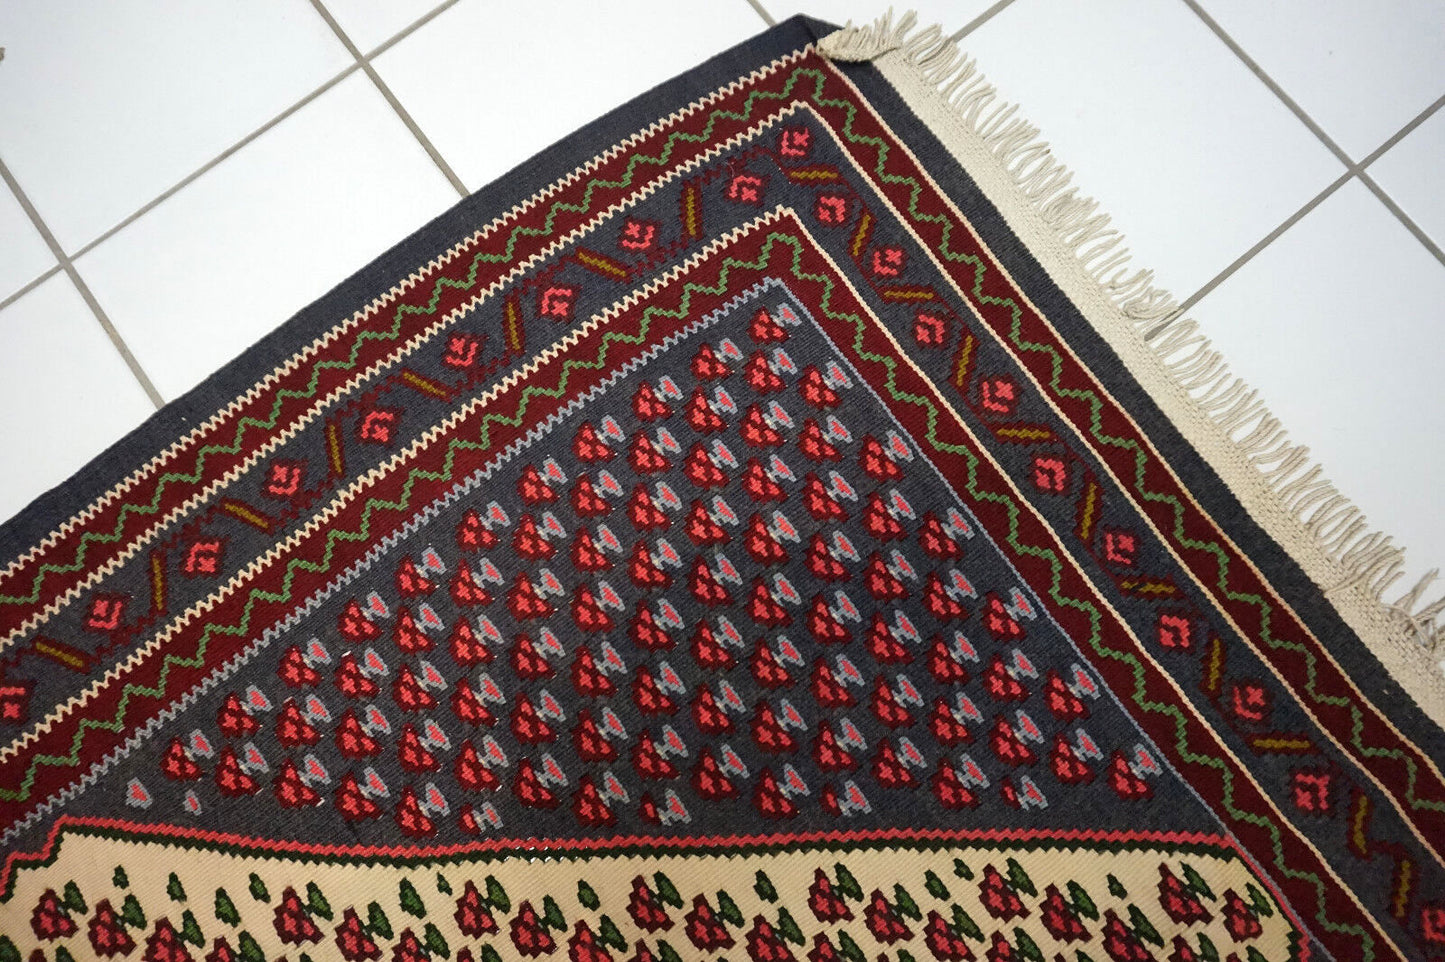 Detailed view of handwoven wool rug from the Middle East